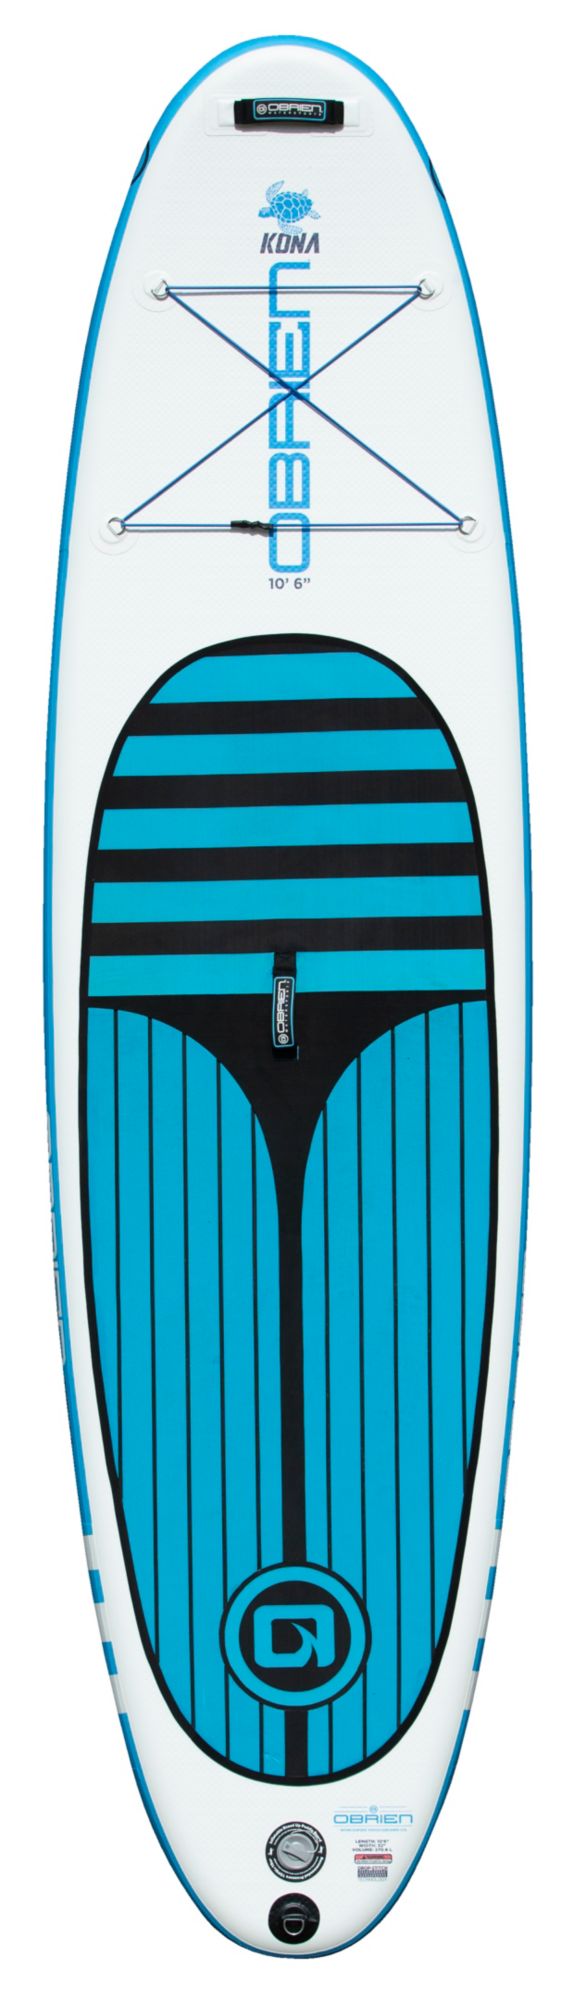 Photos - Surfing & Wakeboarding Obrien O'Brien Kona Inflatable Stand-Up Paddle Board, Blue/White 22OBRUKNSPNFTBRD 